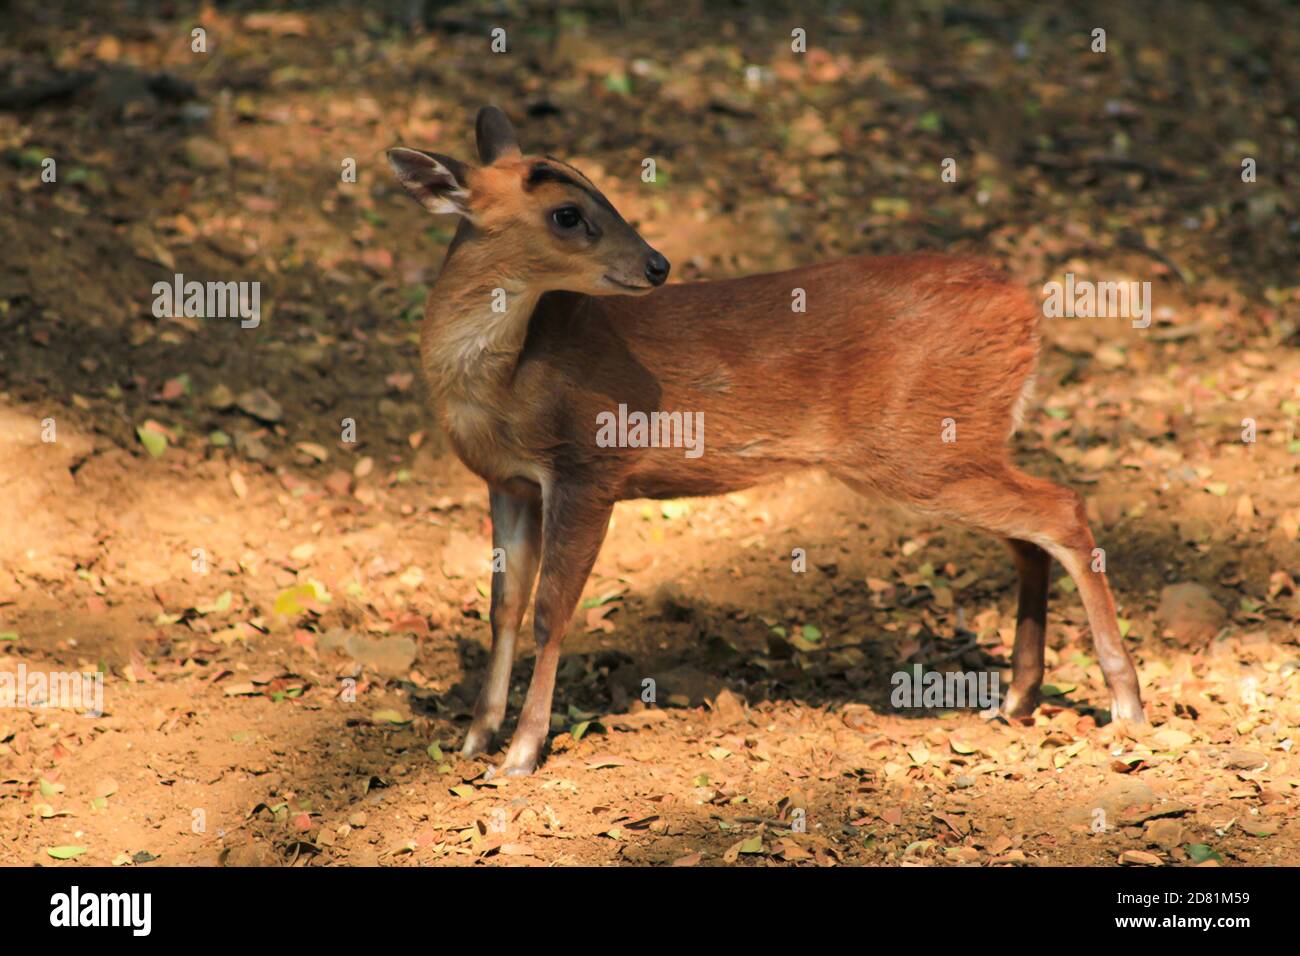 Chital, Cheetal, Spotted deer, Axis deer lie down and look at the camera isolated on background. This has clipping path. blur photo Stock Photo